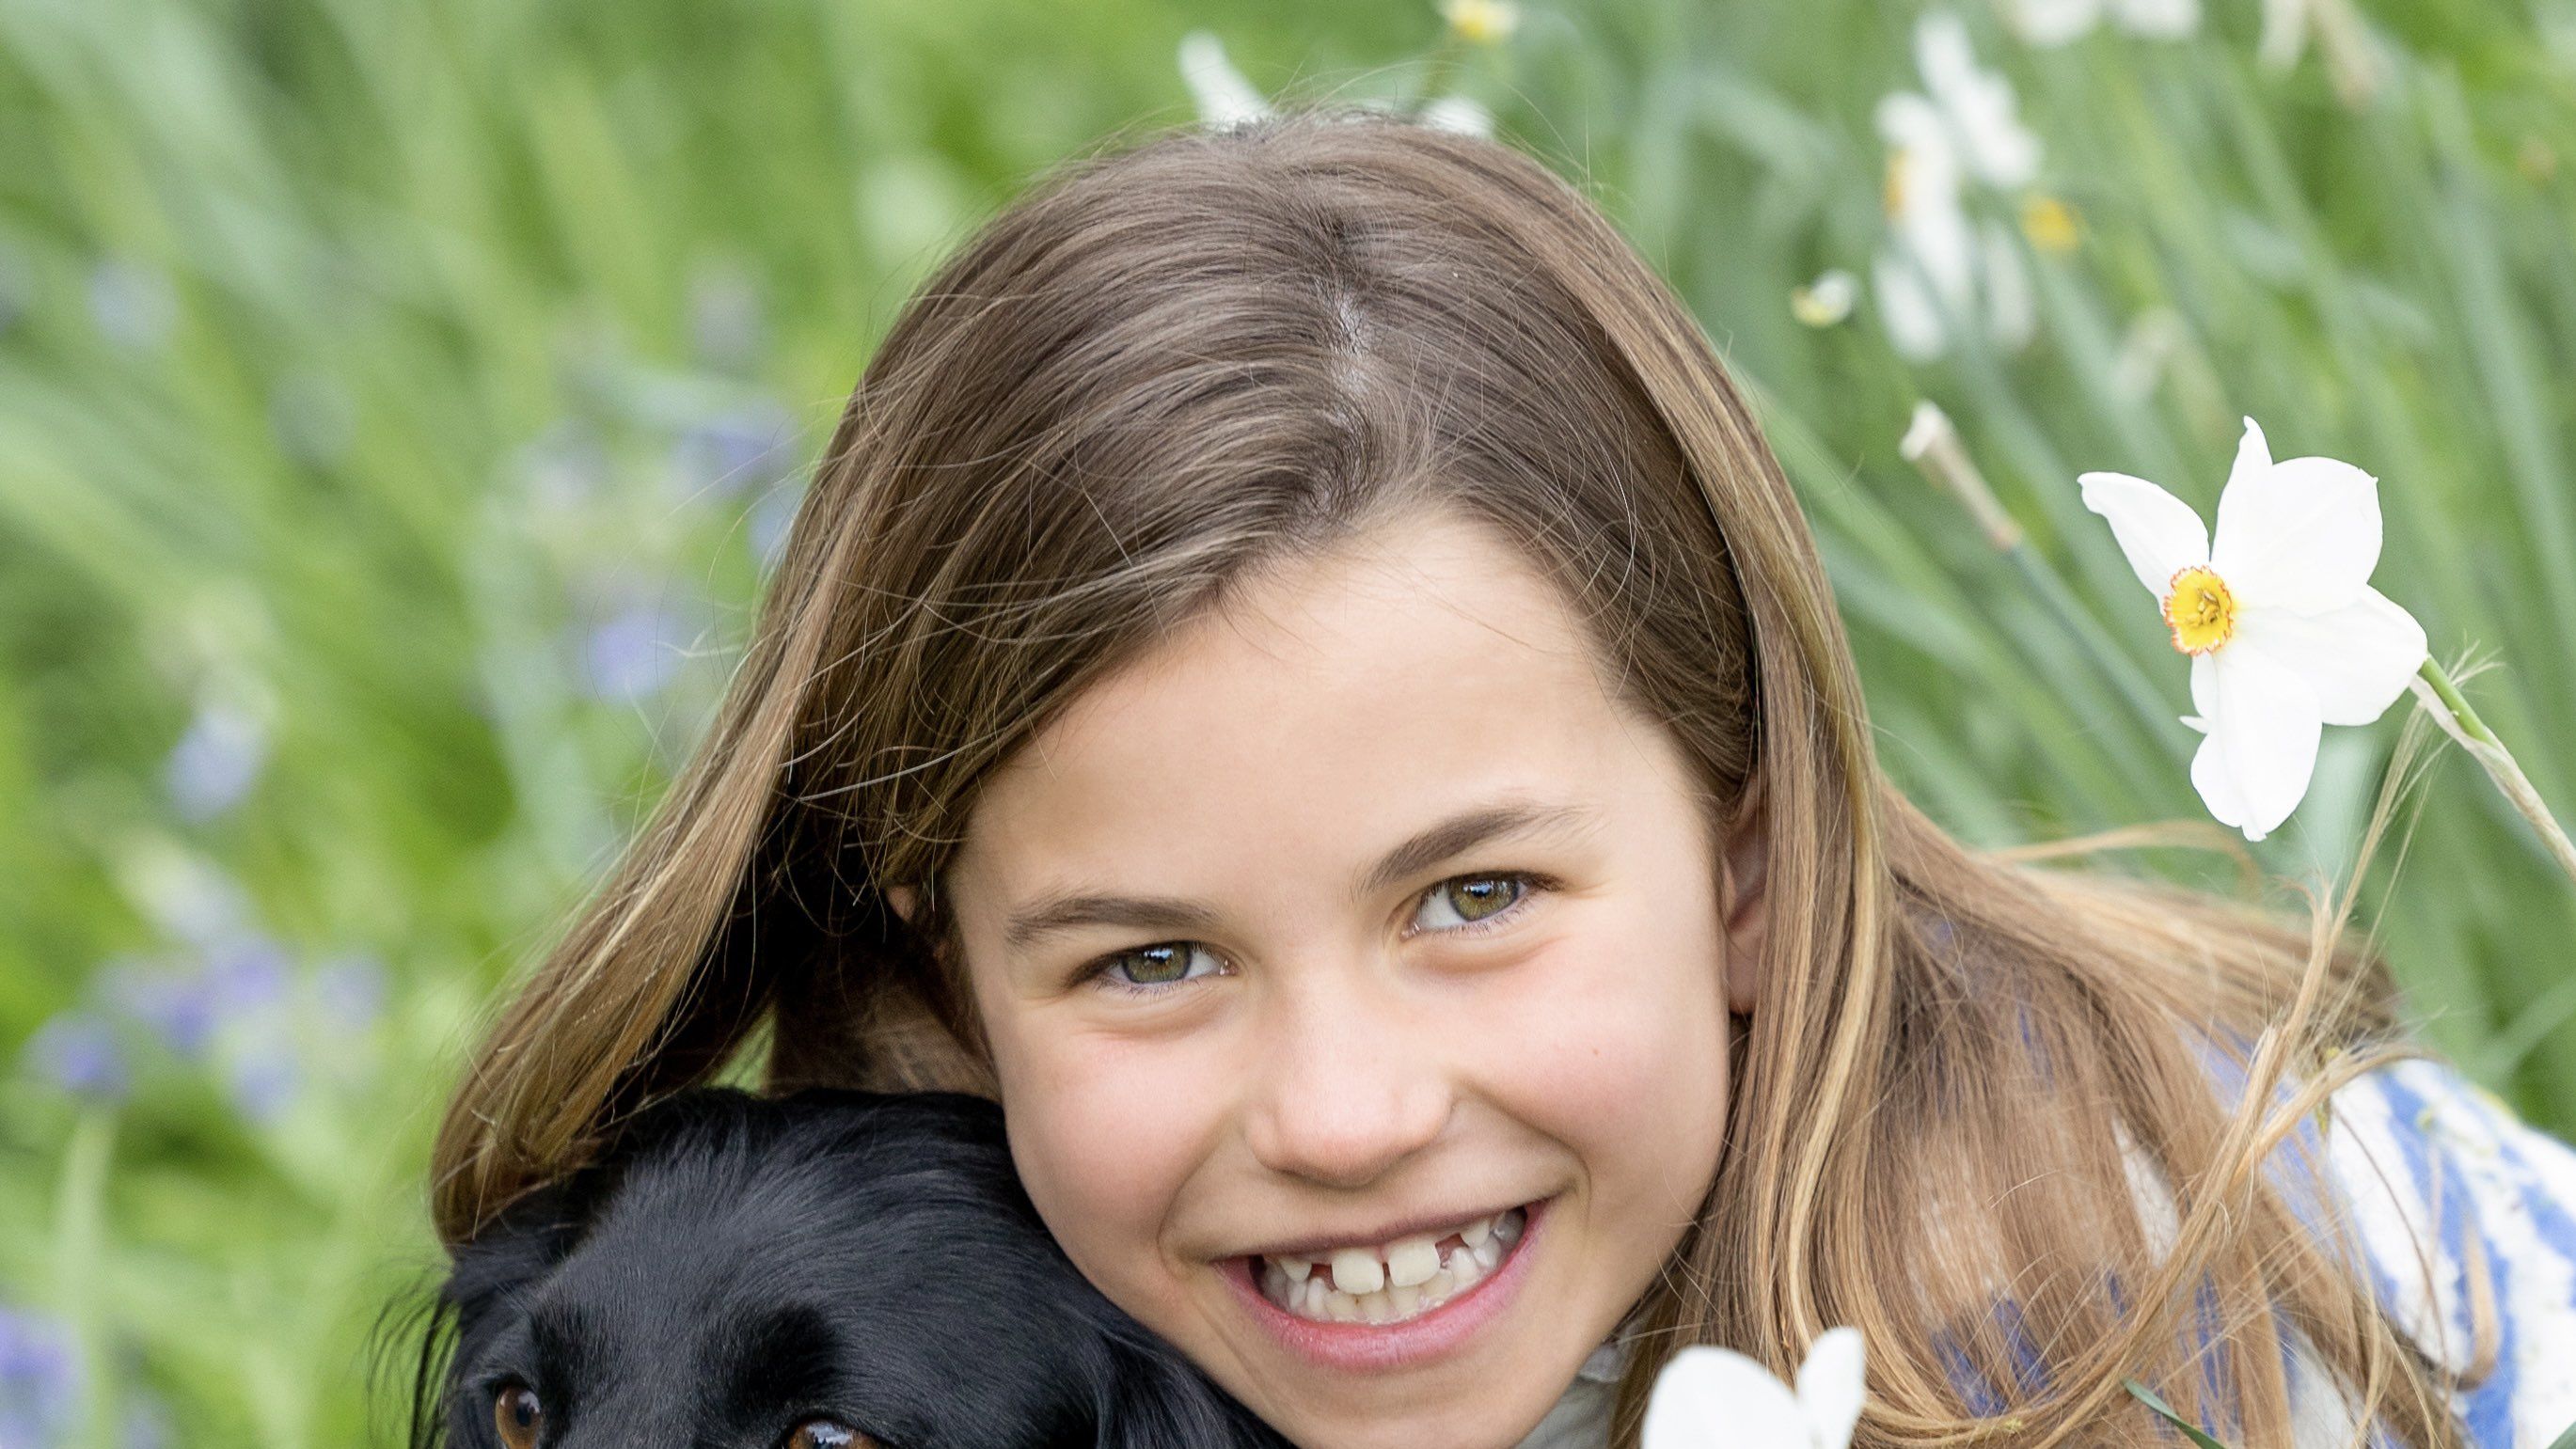 Princess Charlotte turns 8: See the sweet pictures